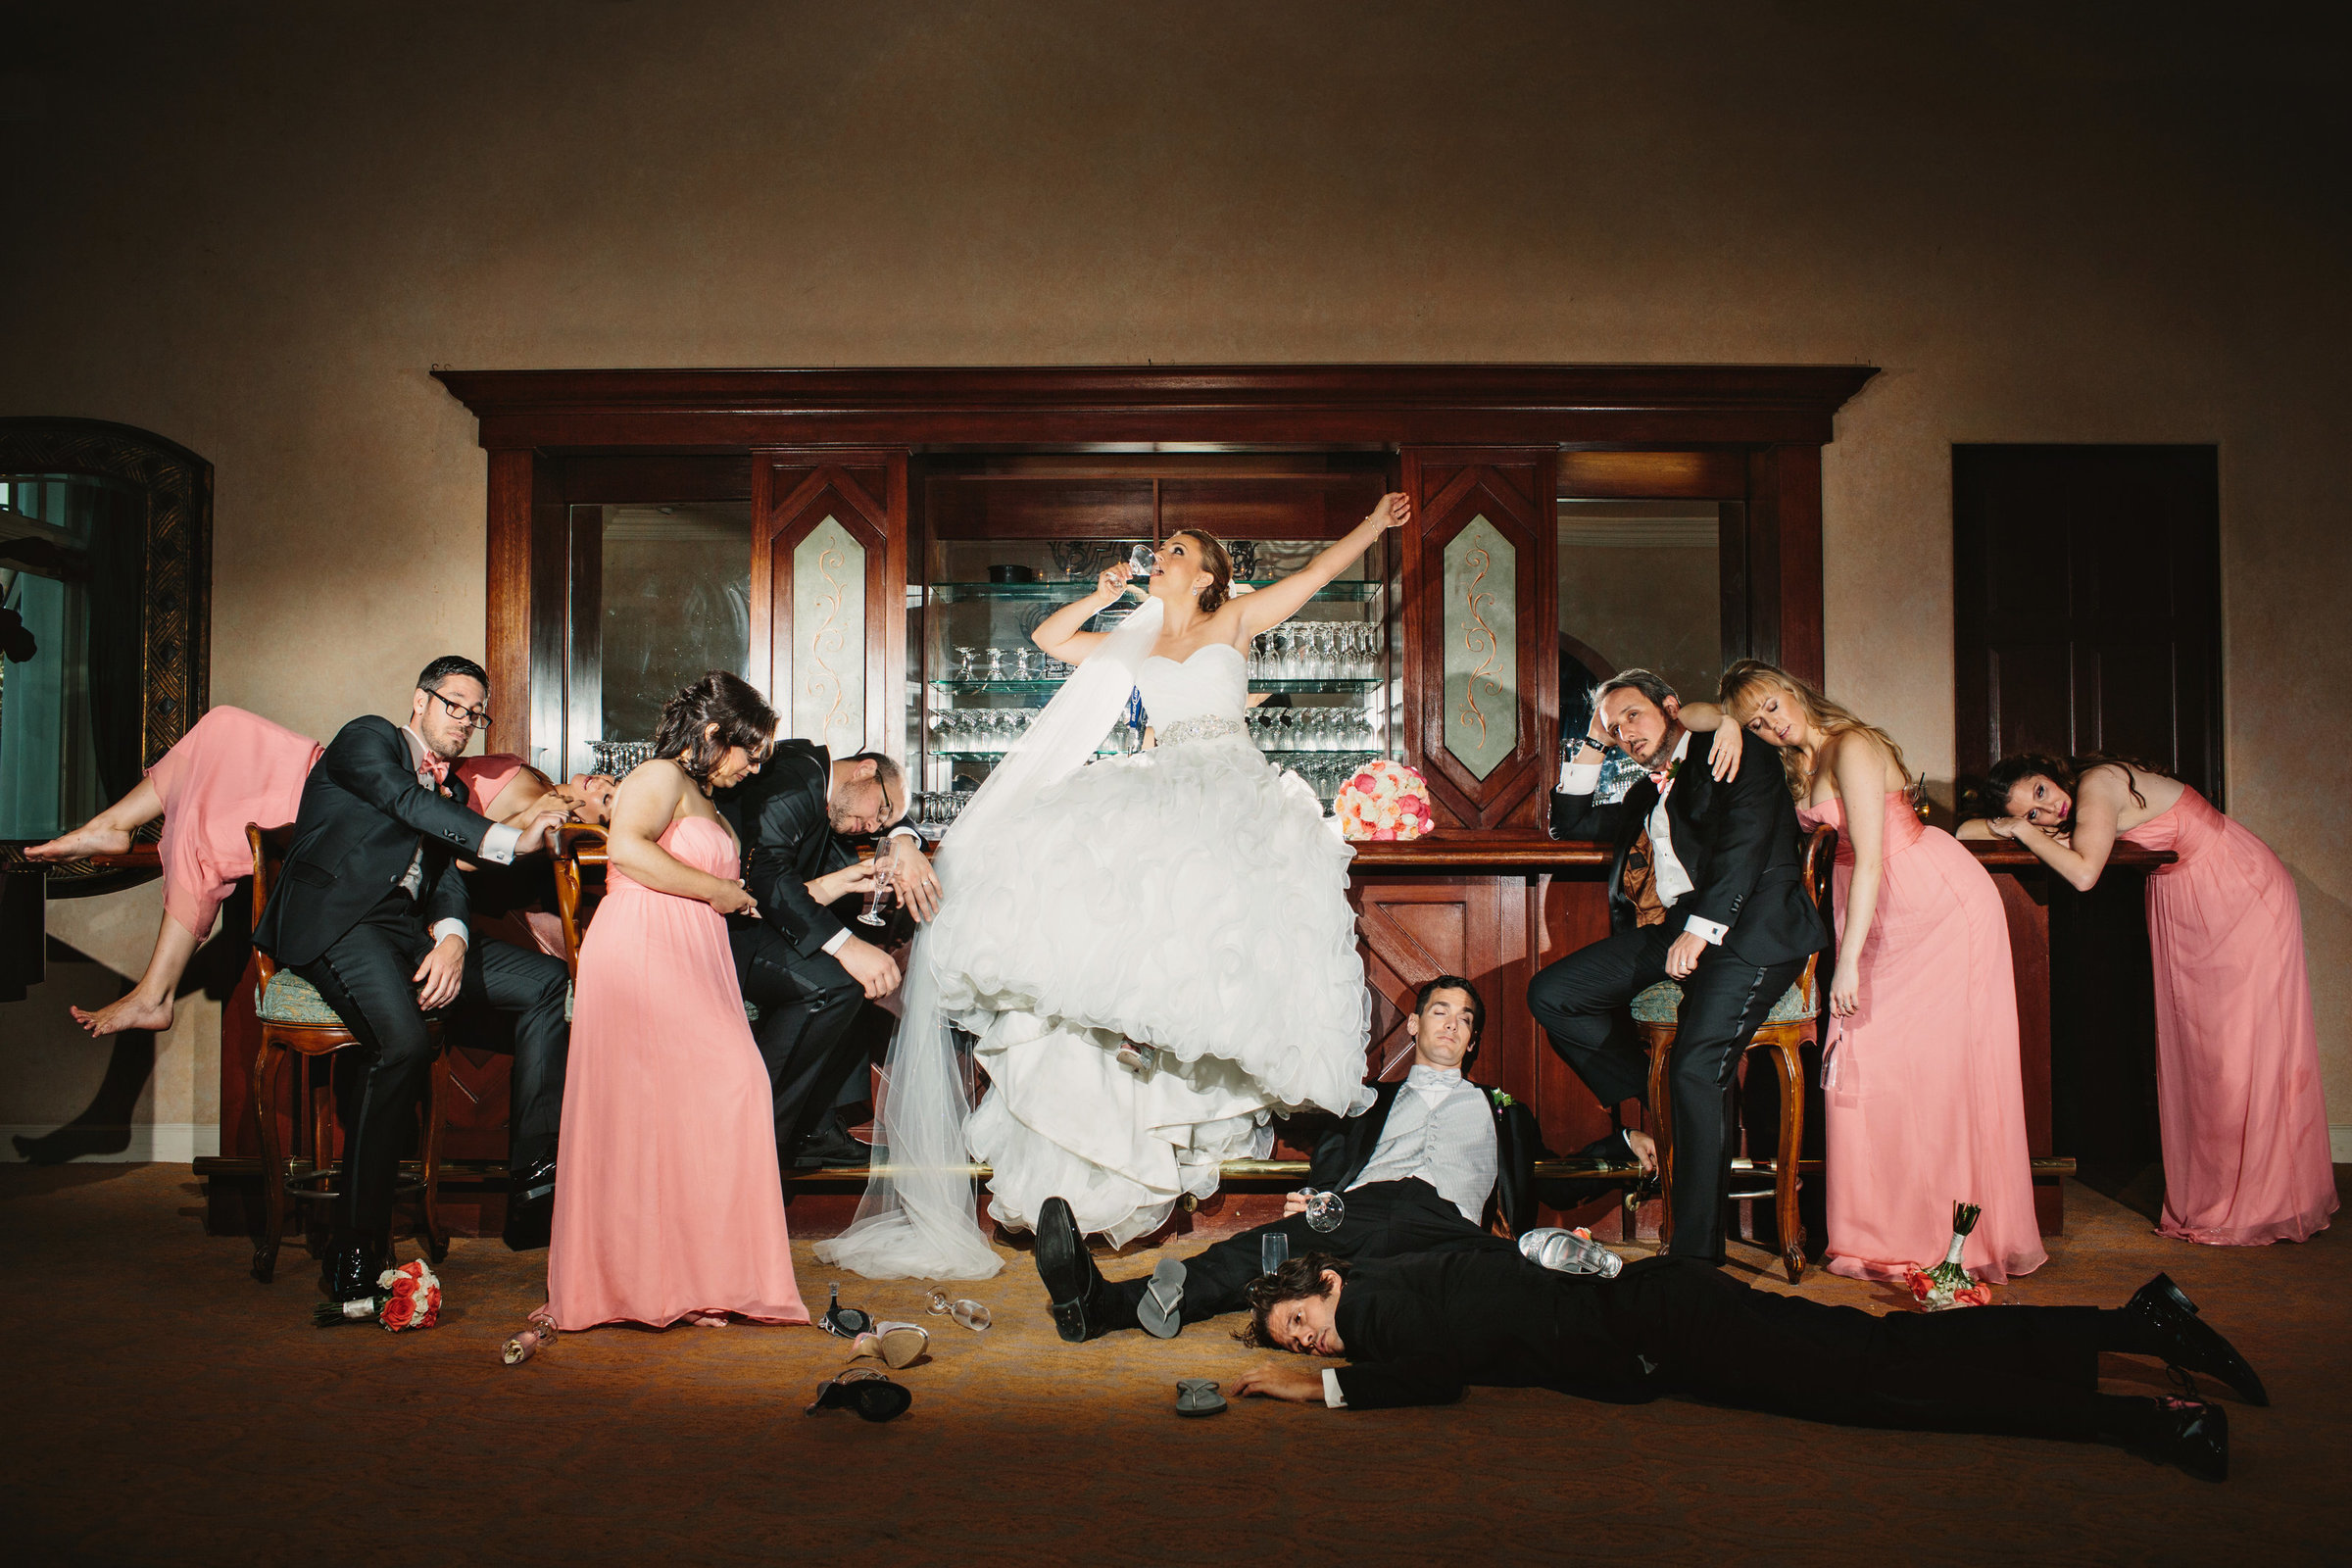 A creative and editorial wedding party photo at the bar in California wedding